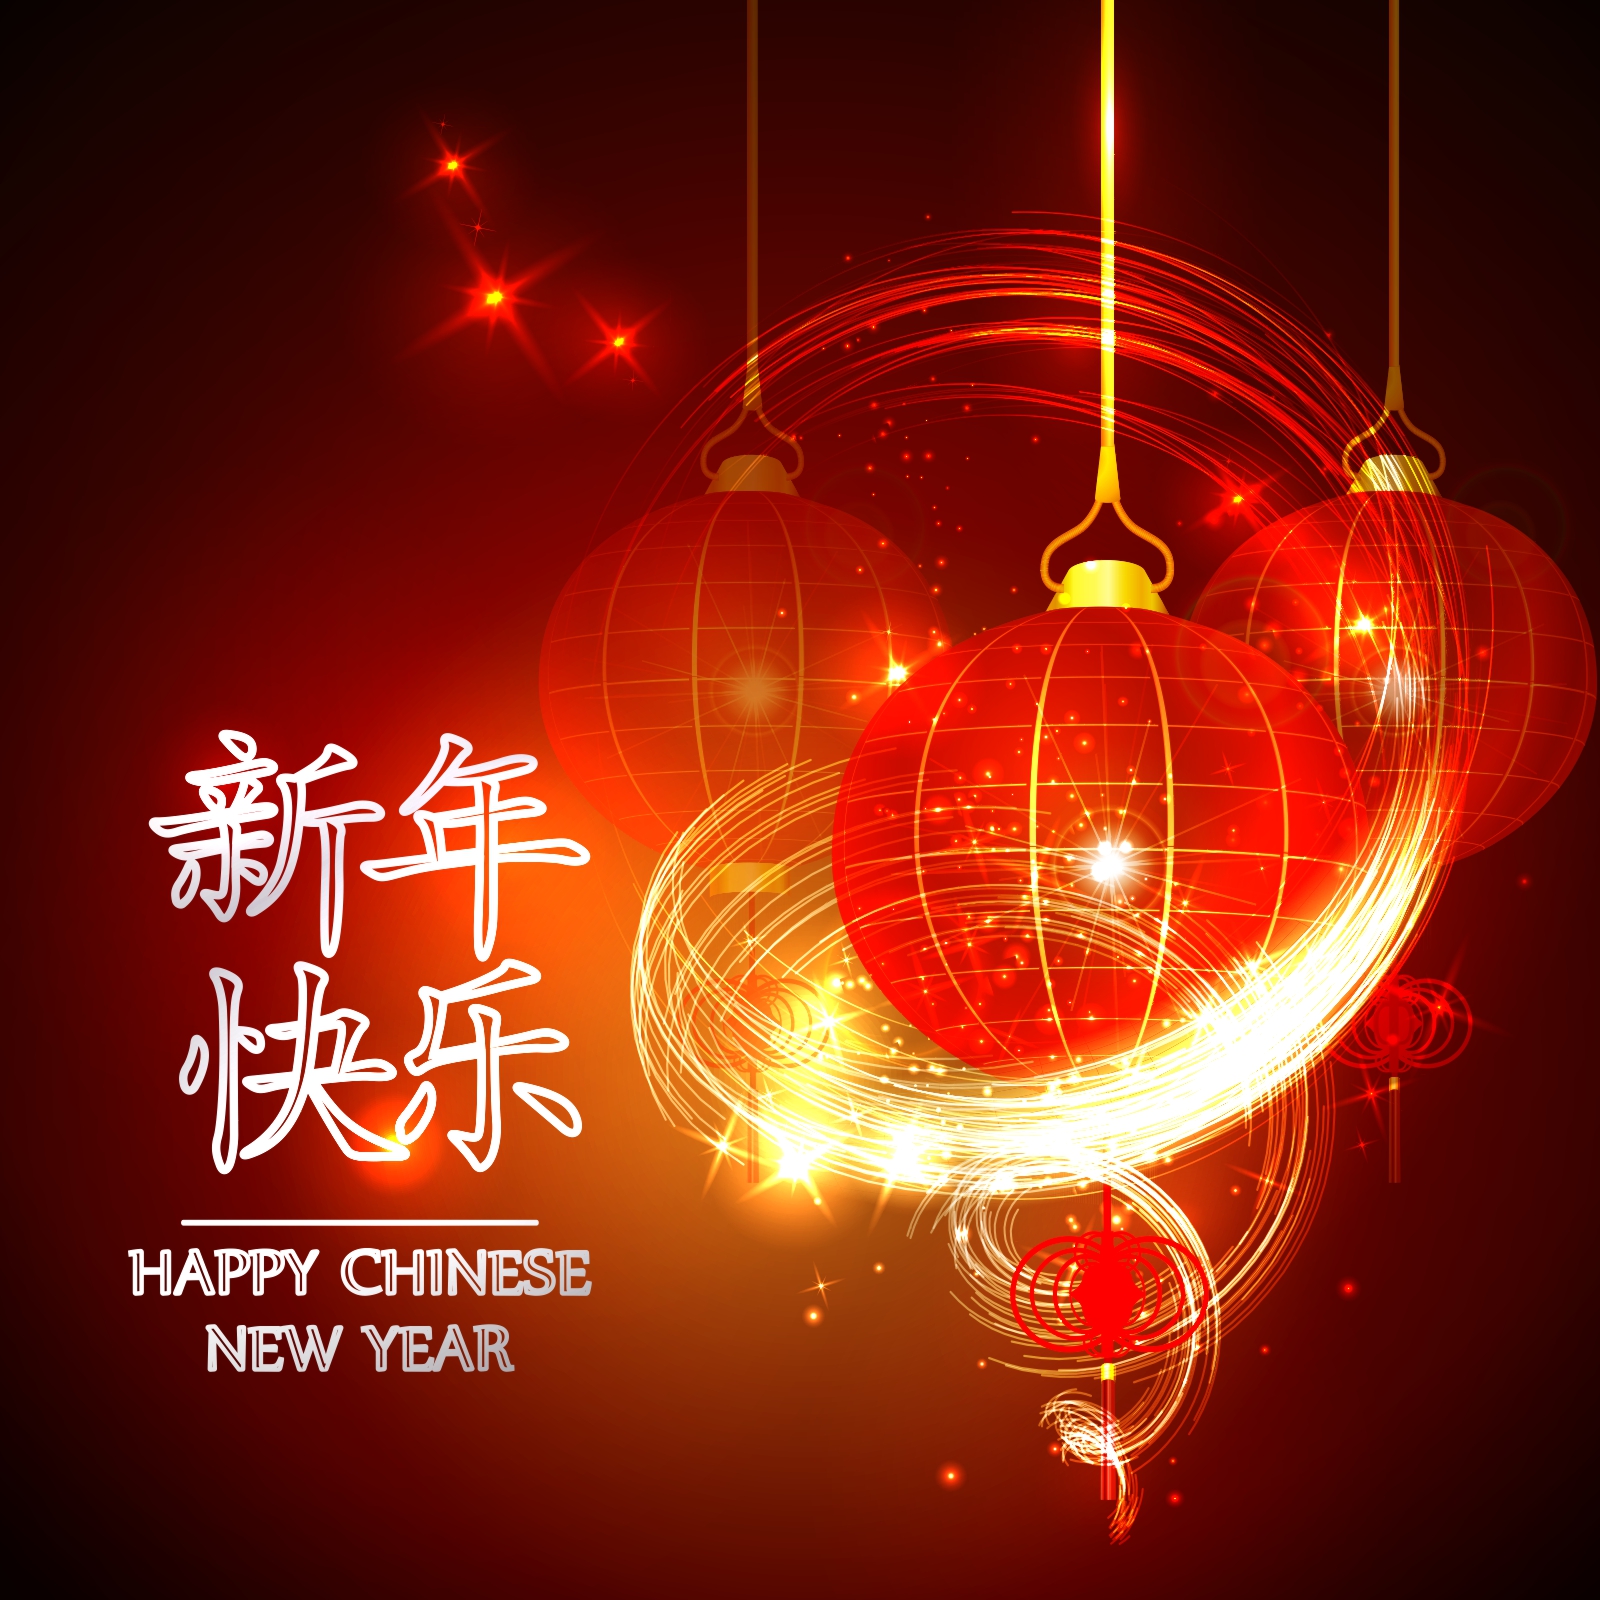 To celebrate the Chinese New Year red lanterns Illustrations Vectors ESP Free Download